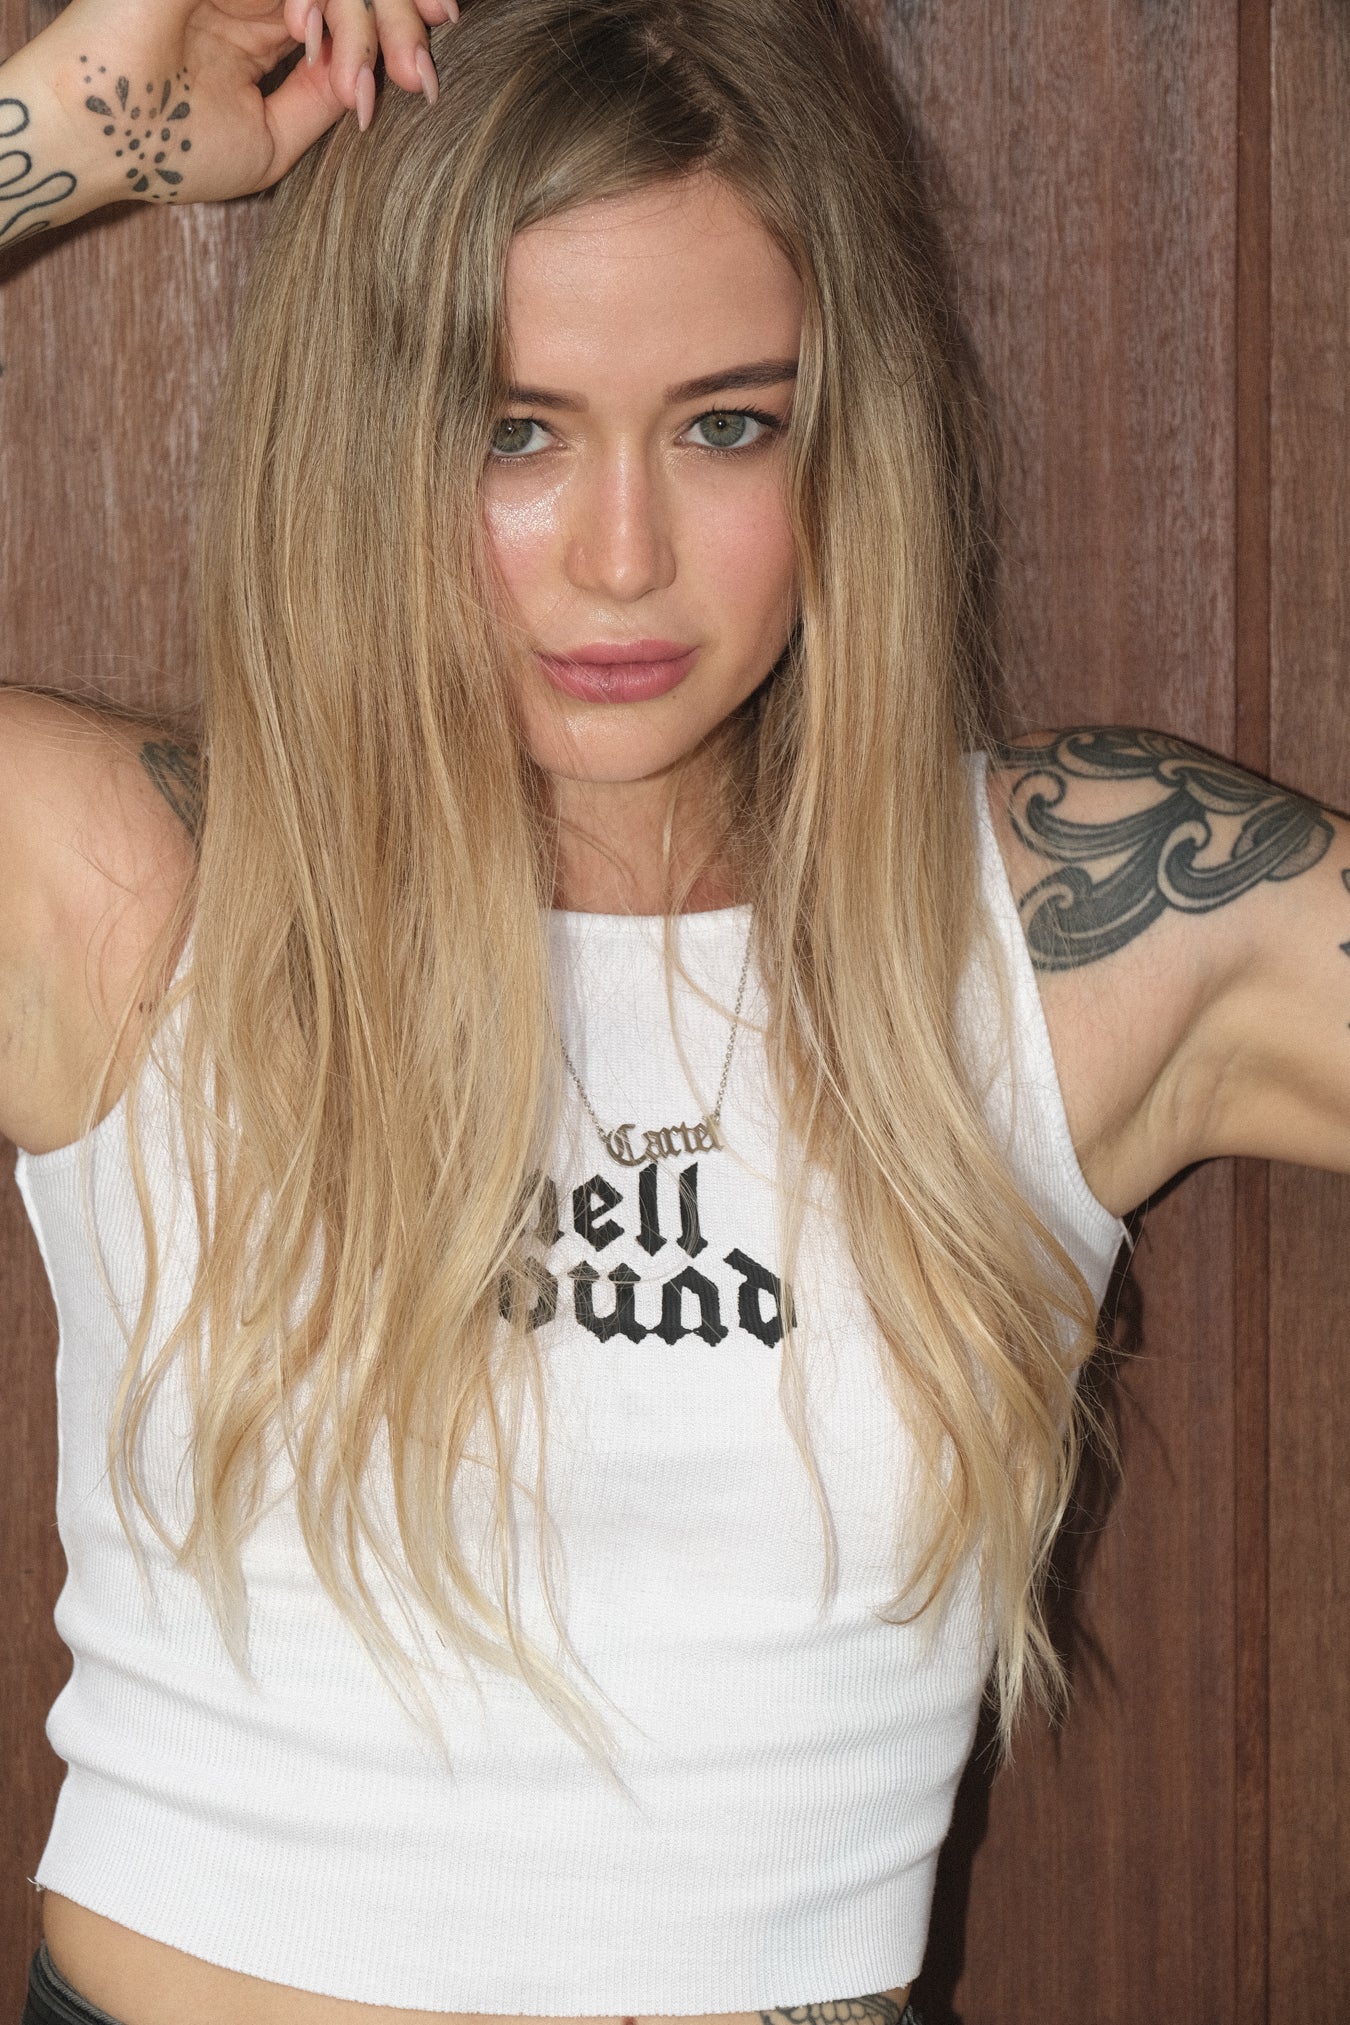 The Hell Bound Cropped Tank - White/Black